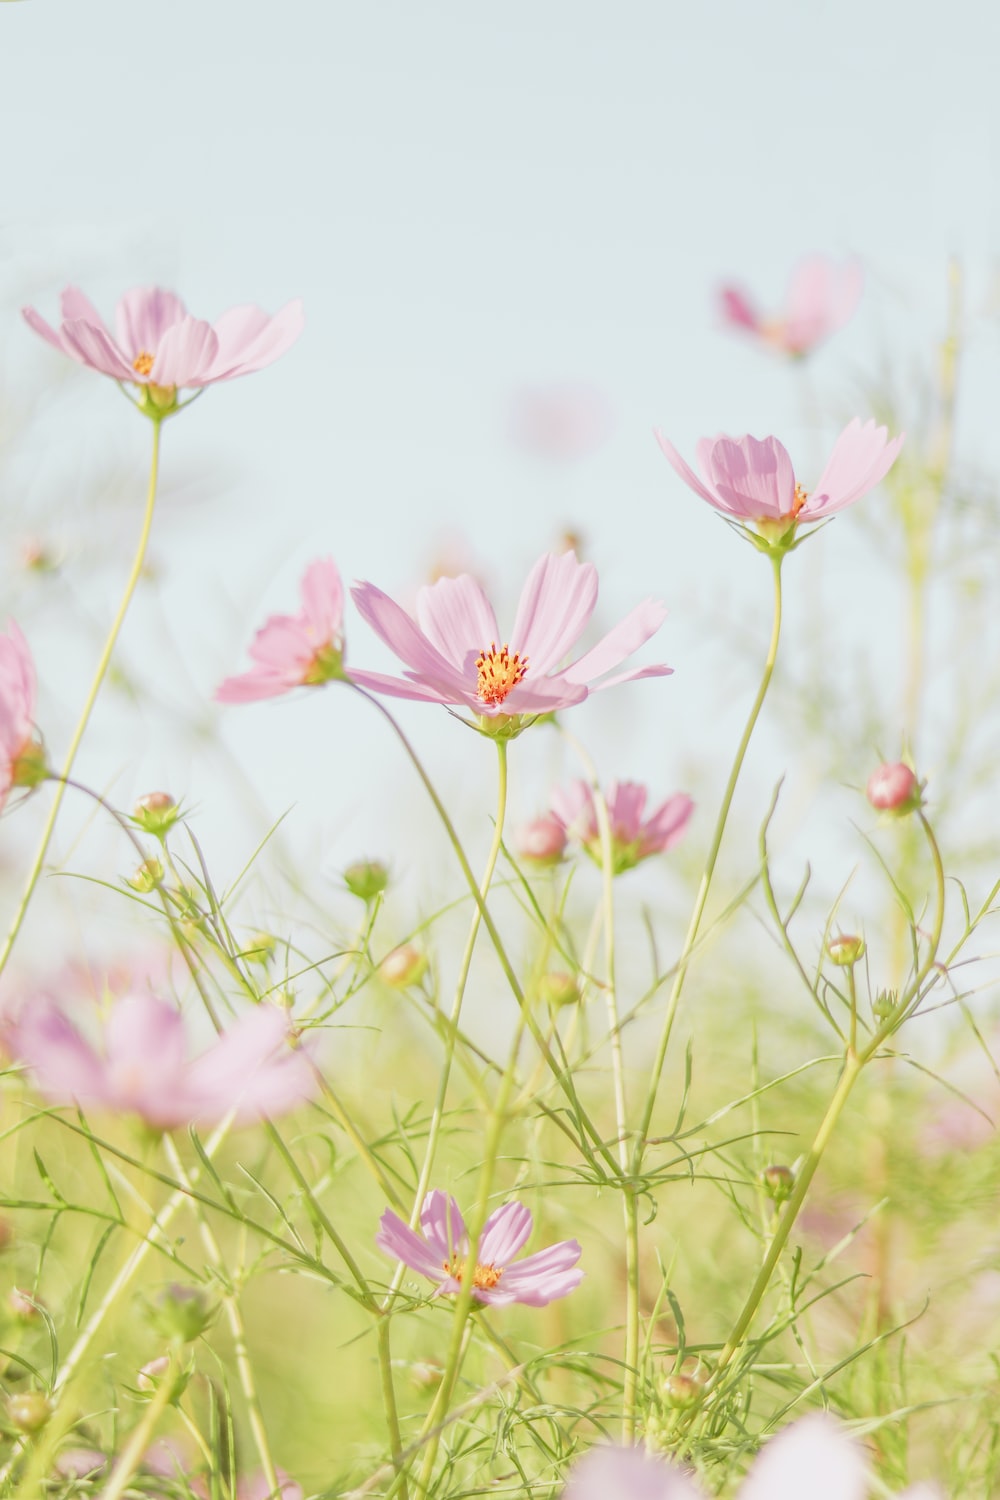 Cosmos Flowers Picture. Download Free Image